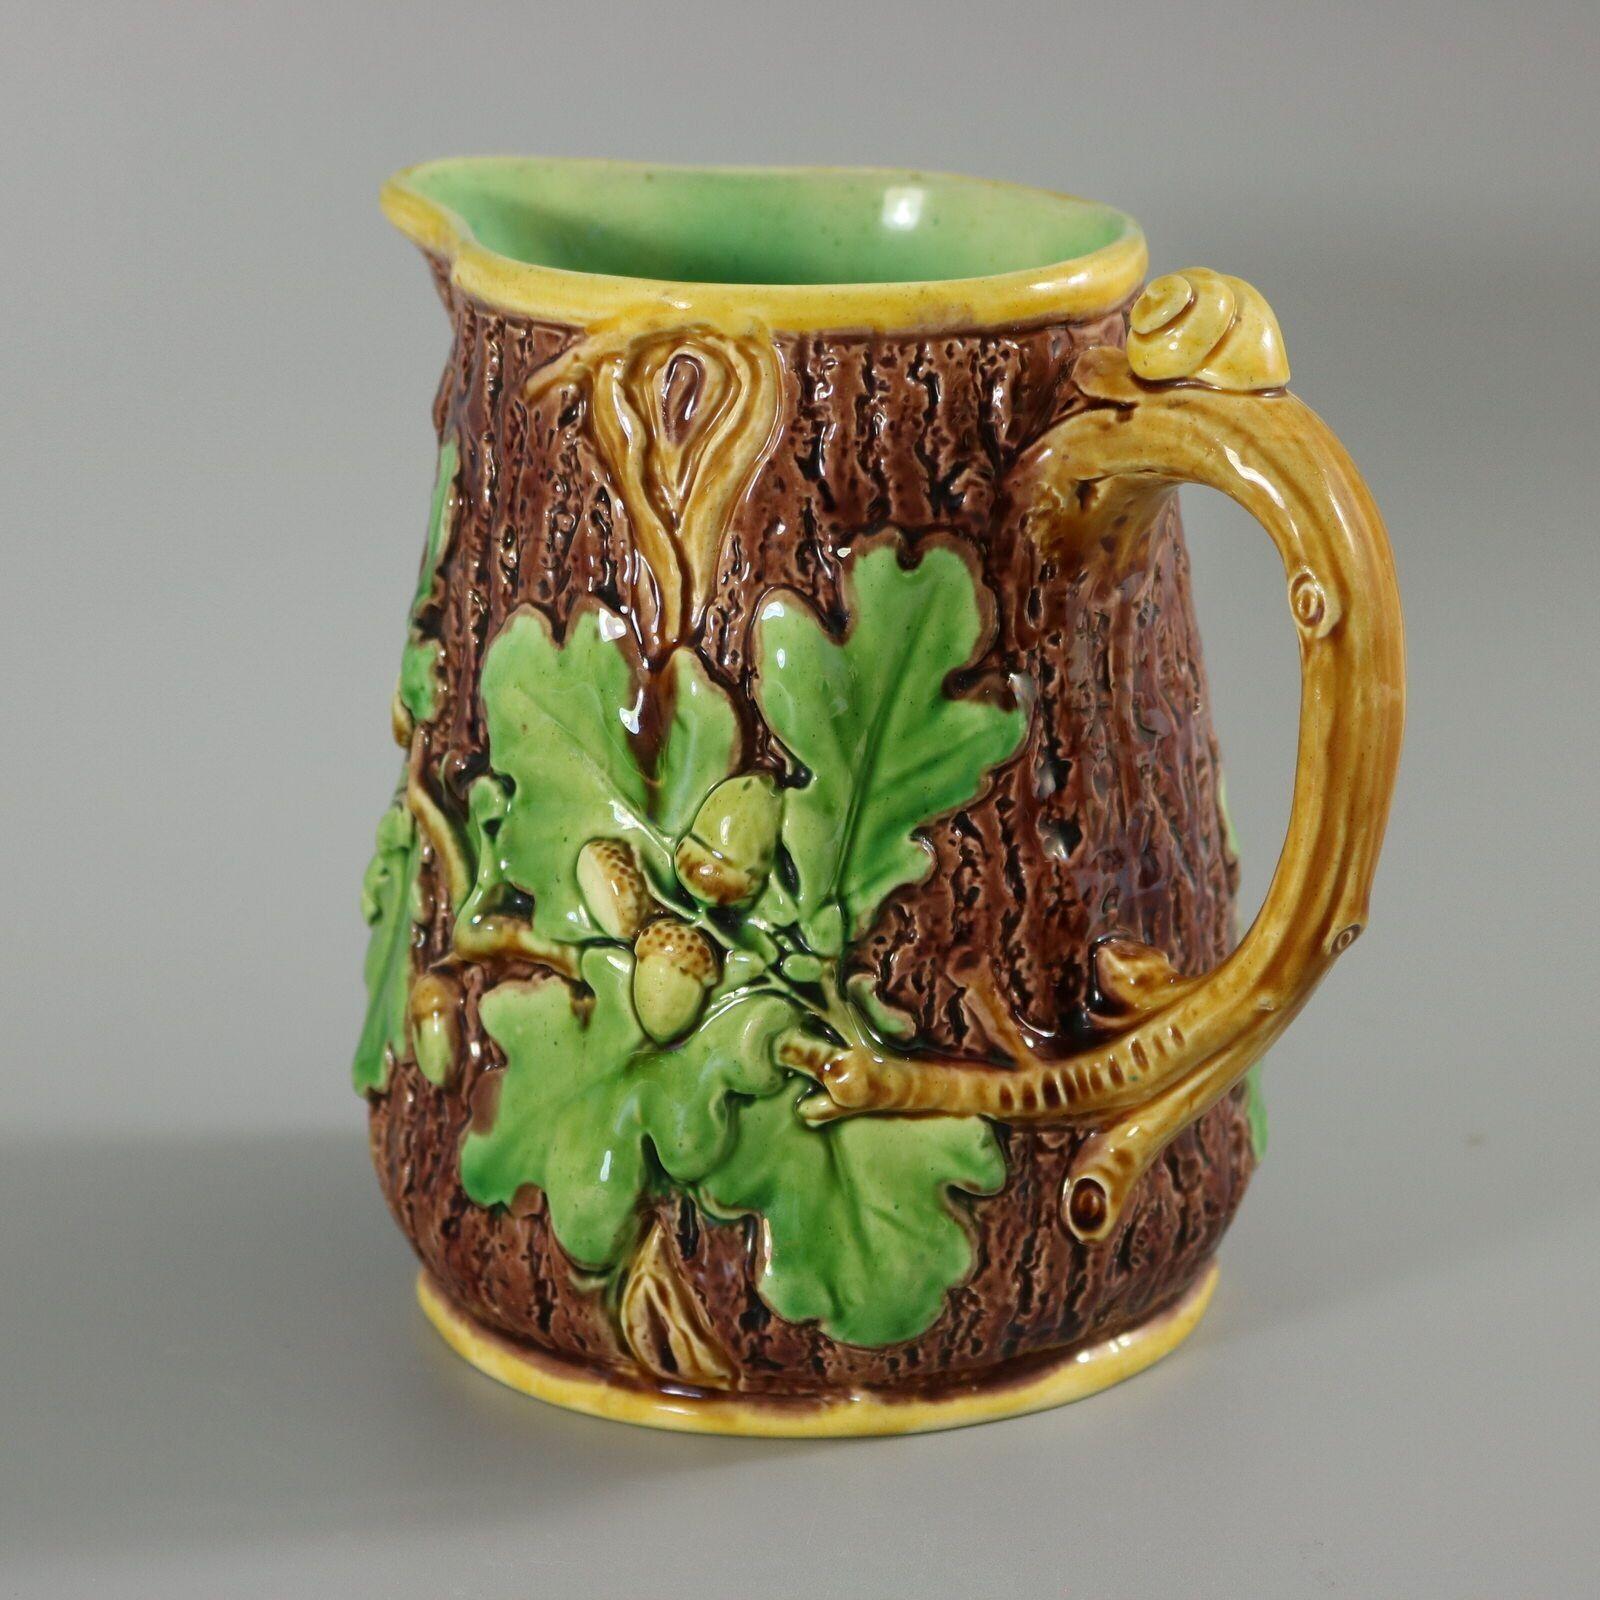 Minton Majolica jug / pitcher which features oak leaves and acorns to the sides and a snail to the handle. Colouration: brown, green, yellow, are predominant. The piece bears maker's marks for the Minton pottery. Bears a pattern number, '12'. Marks